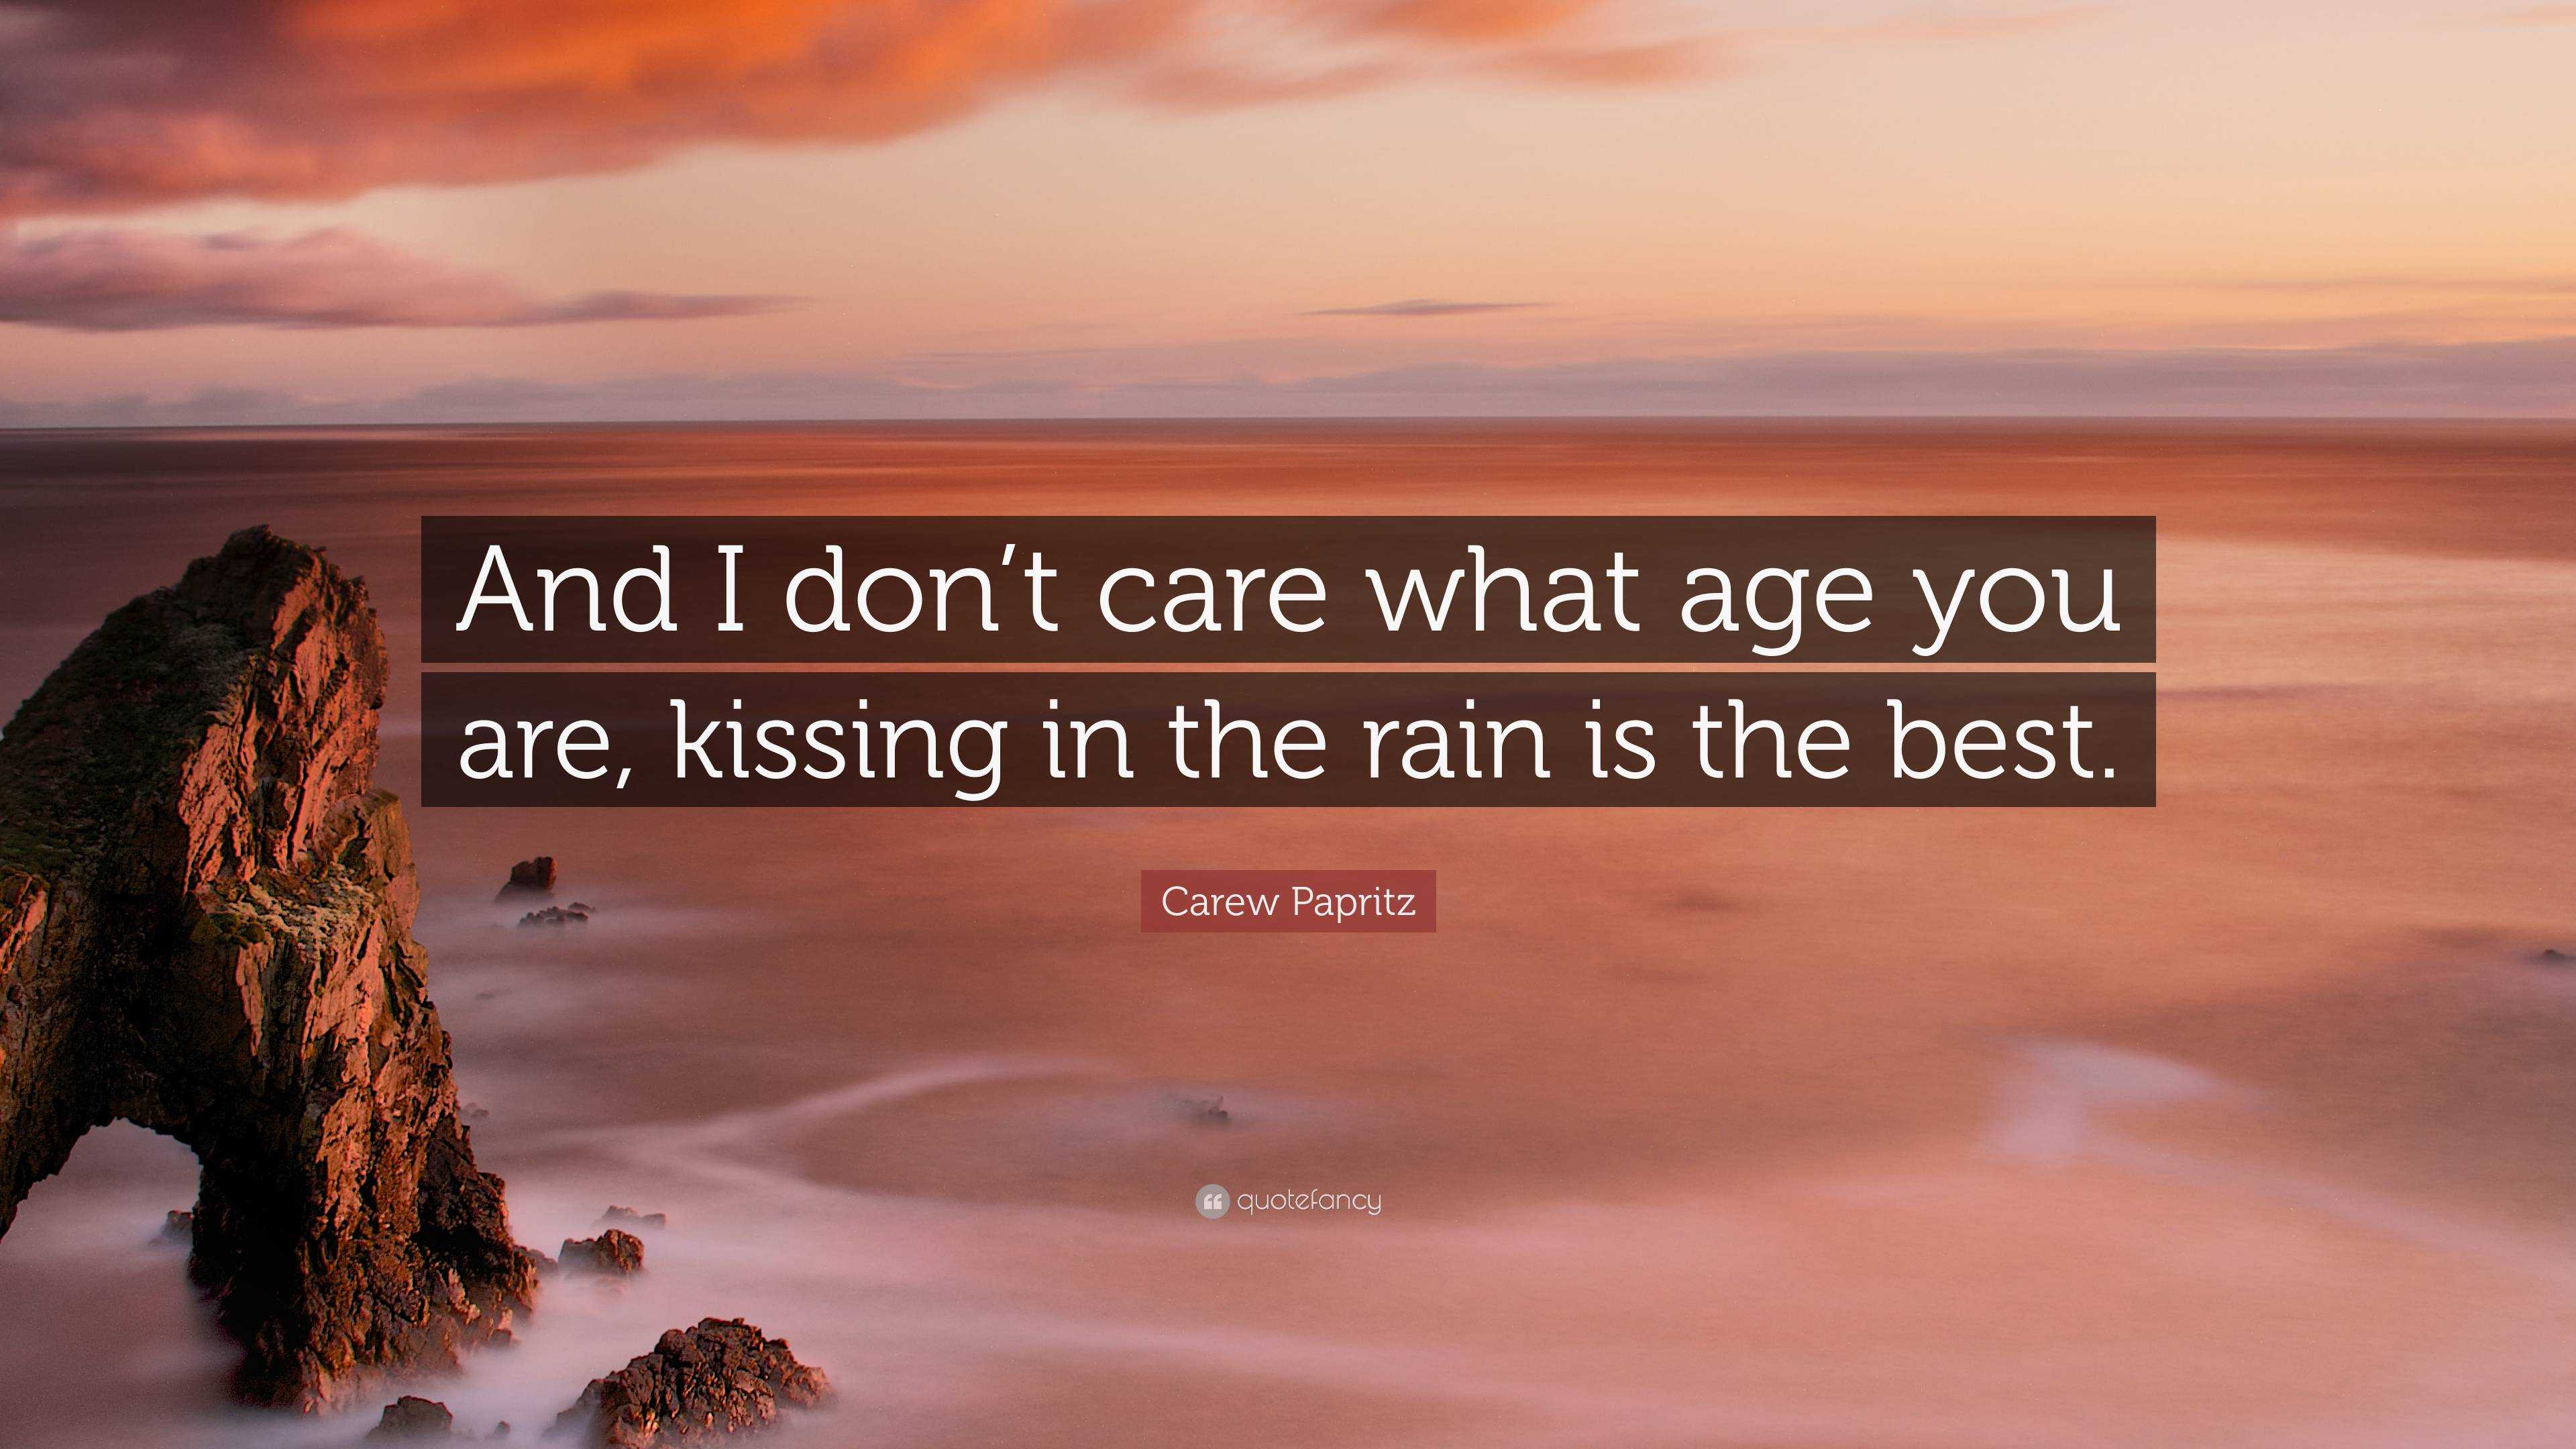 Carew Papritz Quote And I Don T Care What Age You Are Kissing In The Rain